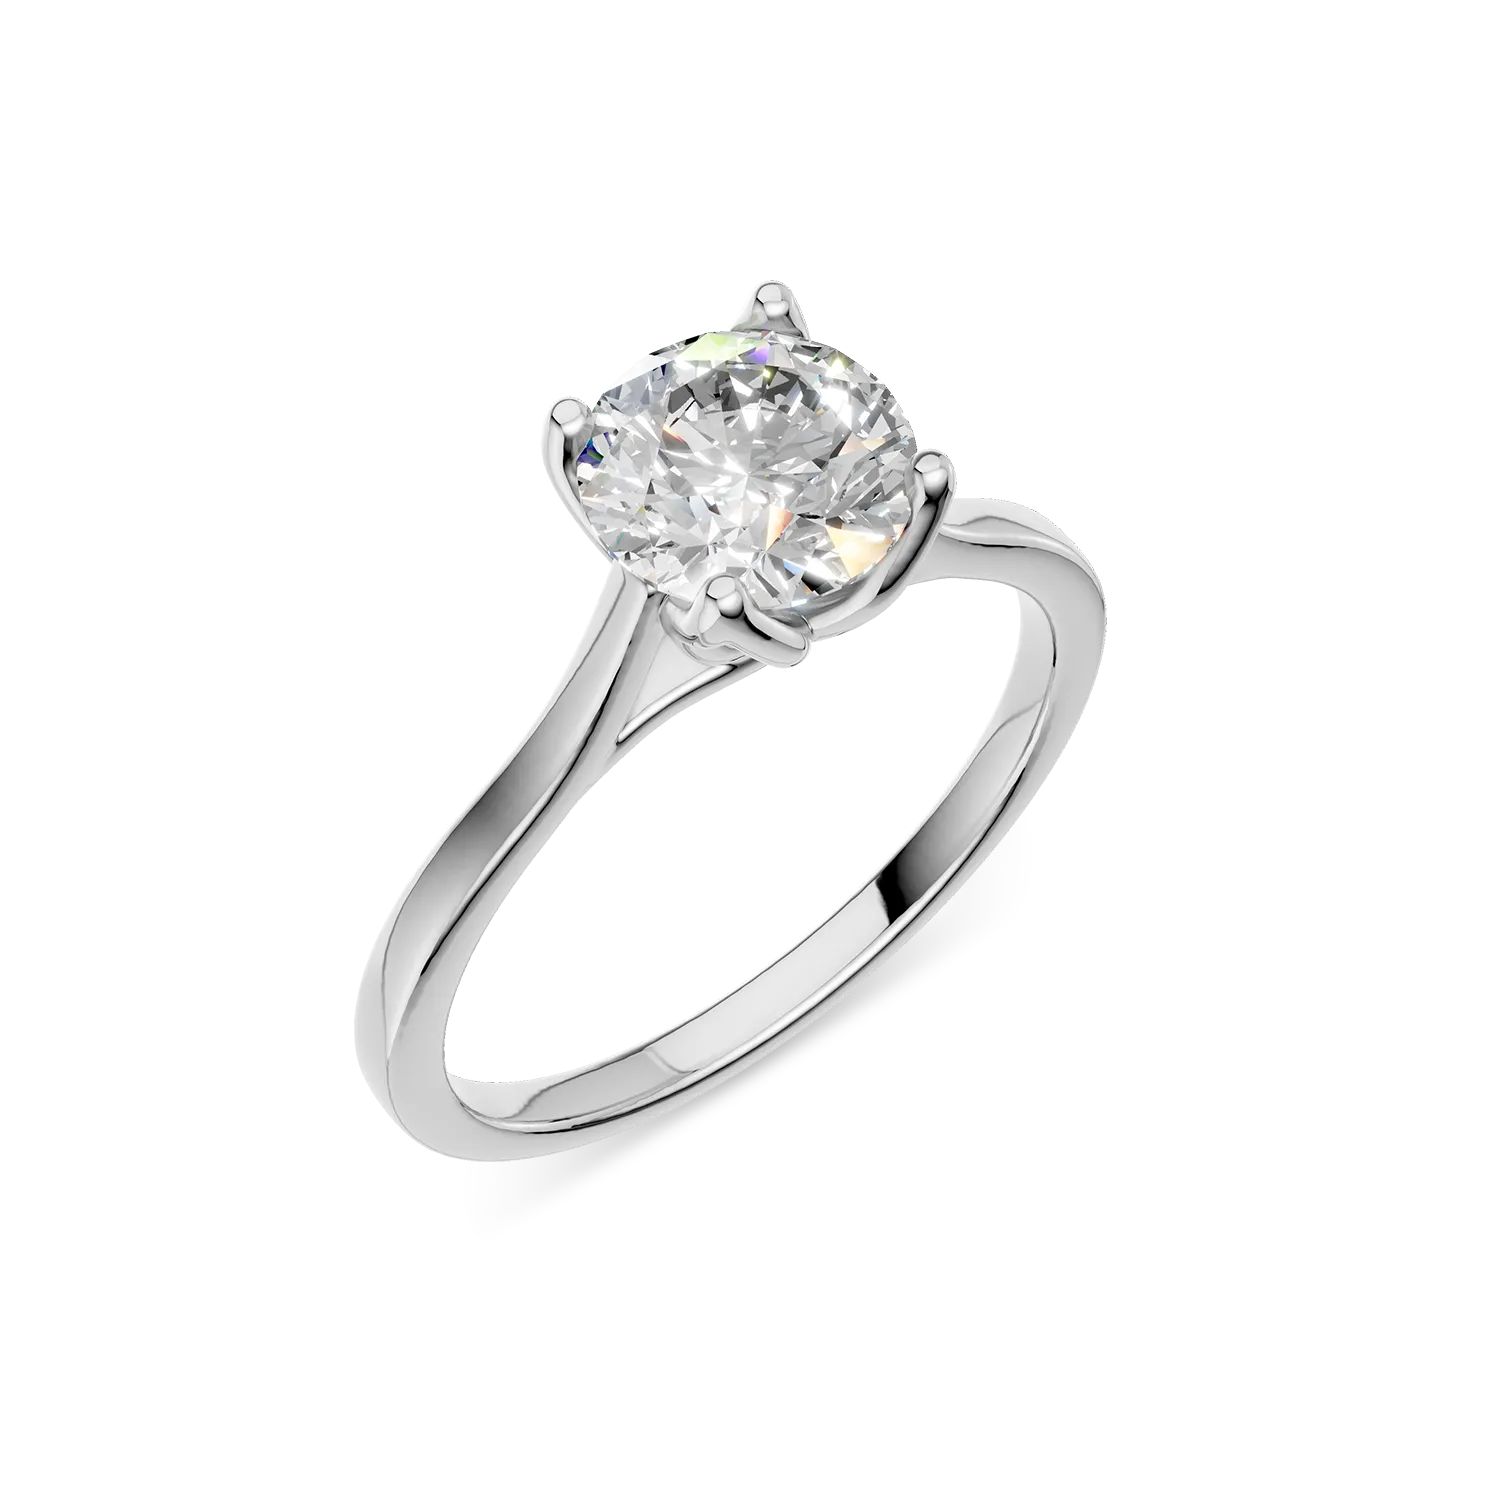 White gold Lotus engagement ring with 1.02ct solitaire lab grown diamond